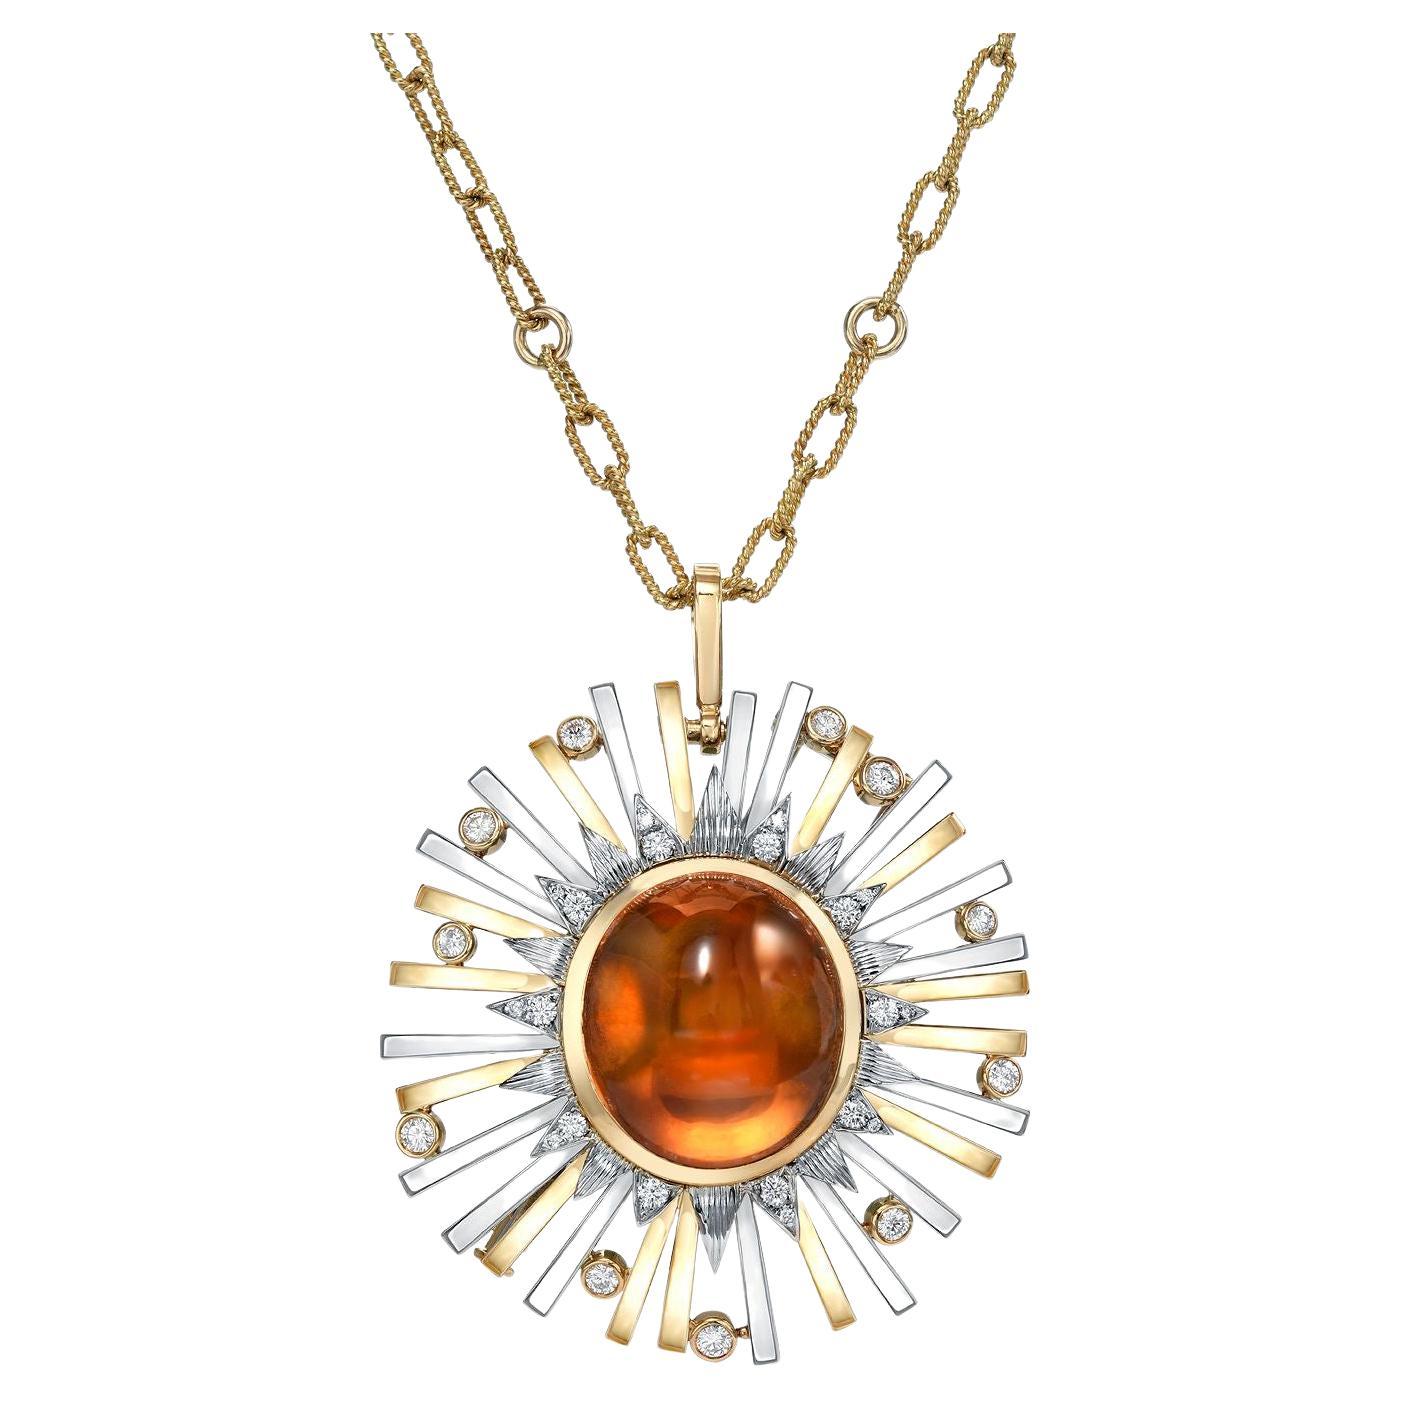 Madeira Citrine Cabochon 24.14 Carat Pendant Necklace Brooch For Sale